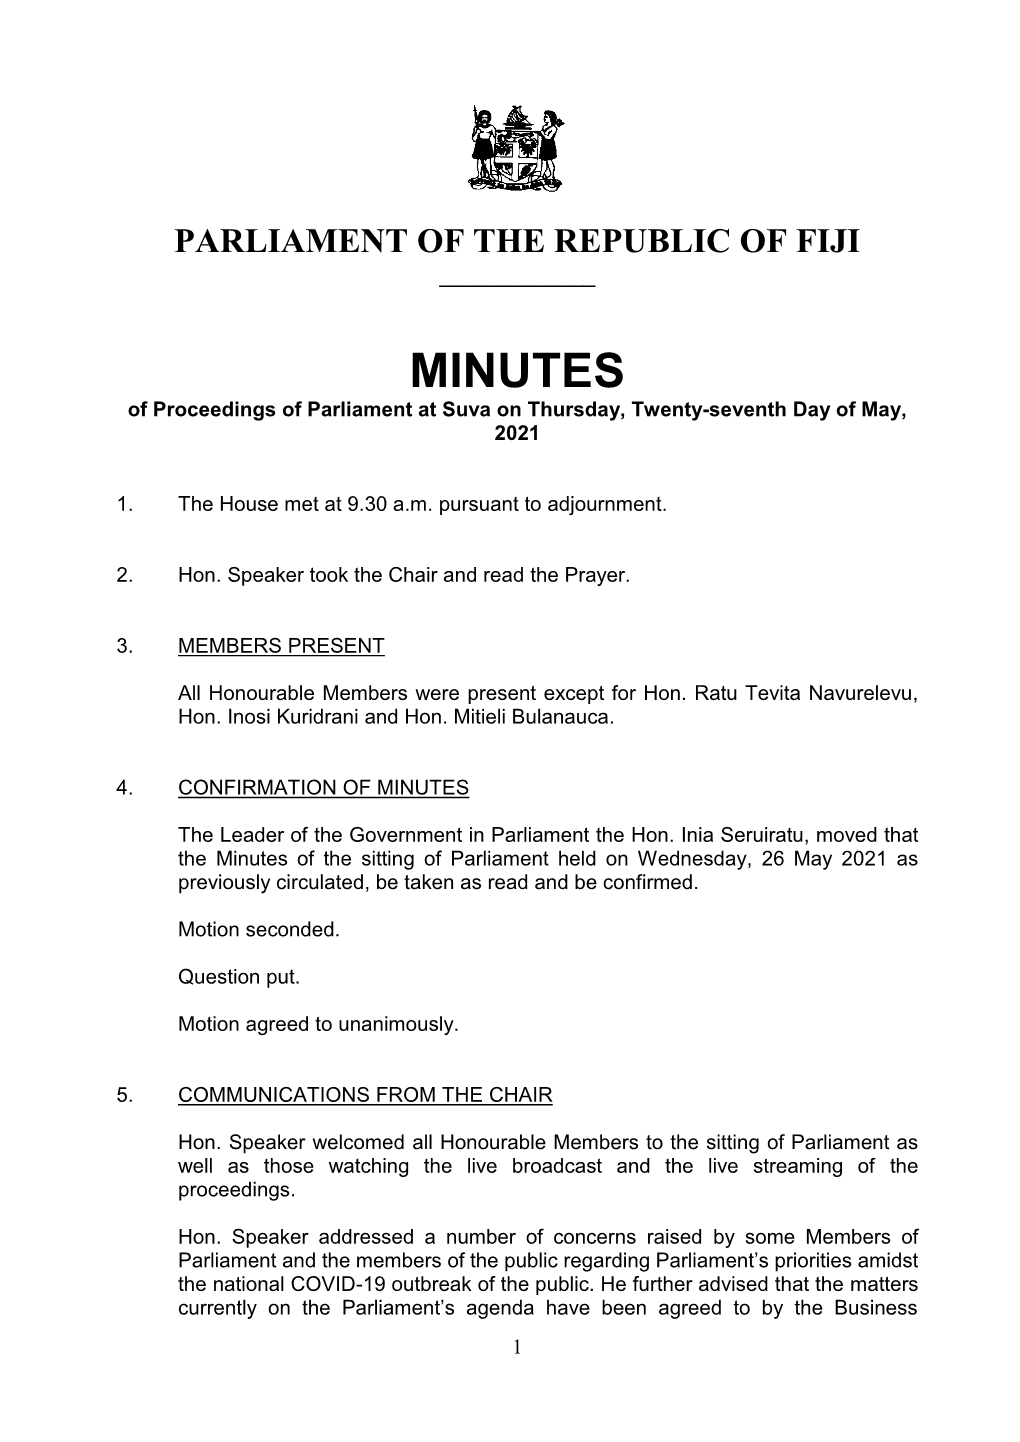 MINUTES of Proceedings of Parliament at Suva on Thursday, Twenty-Seventh Day of May, 2021